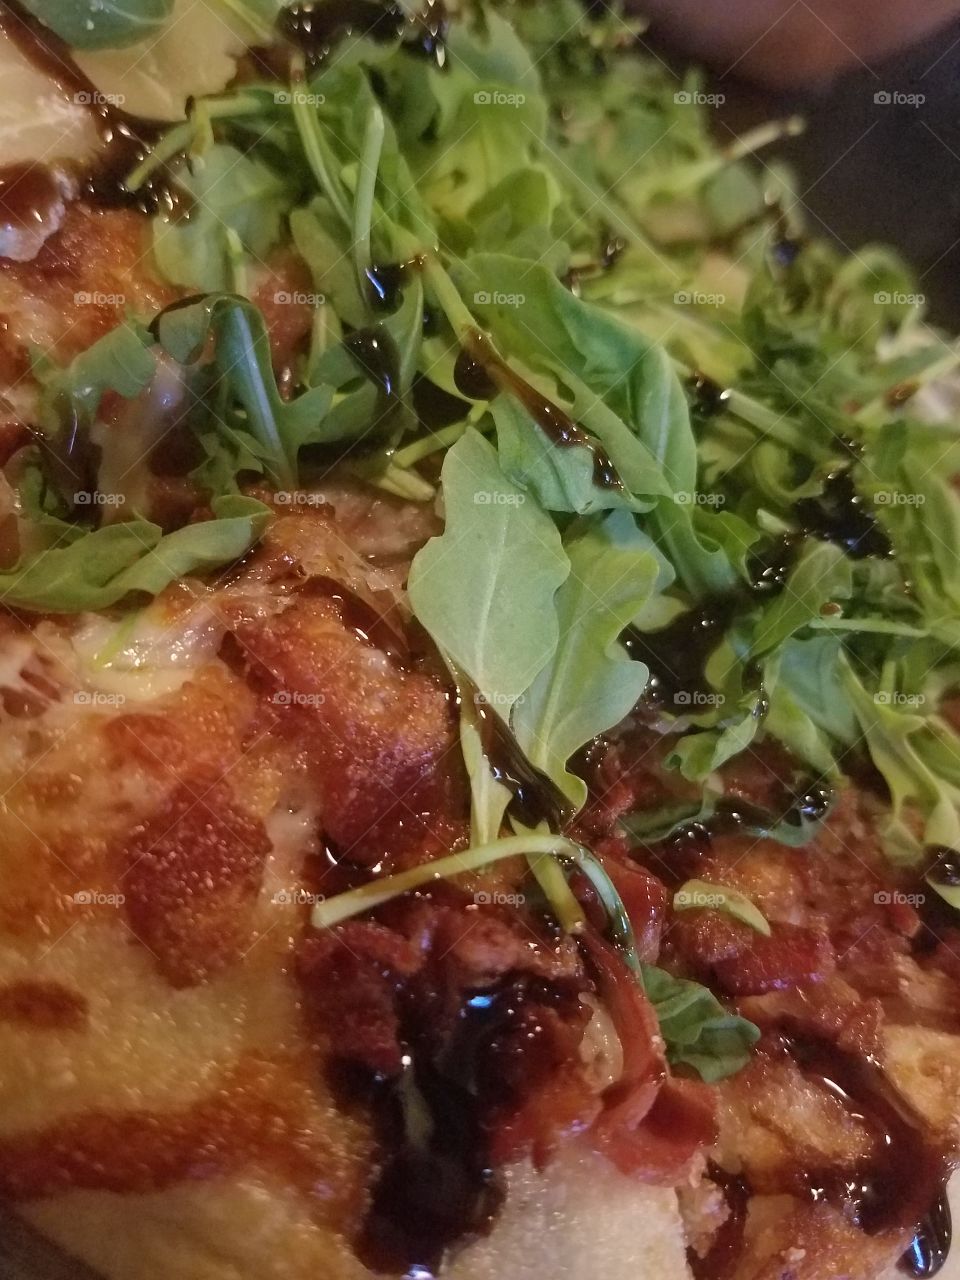 Yummy balsamic vinegar adds the perfect sweetness to this pizza